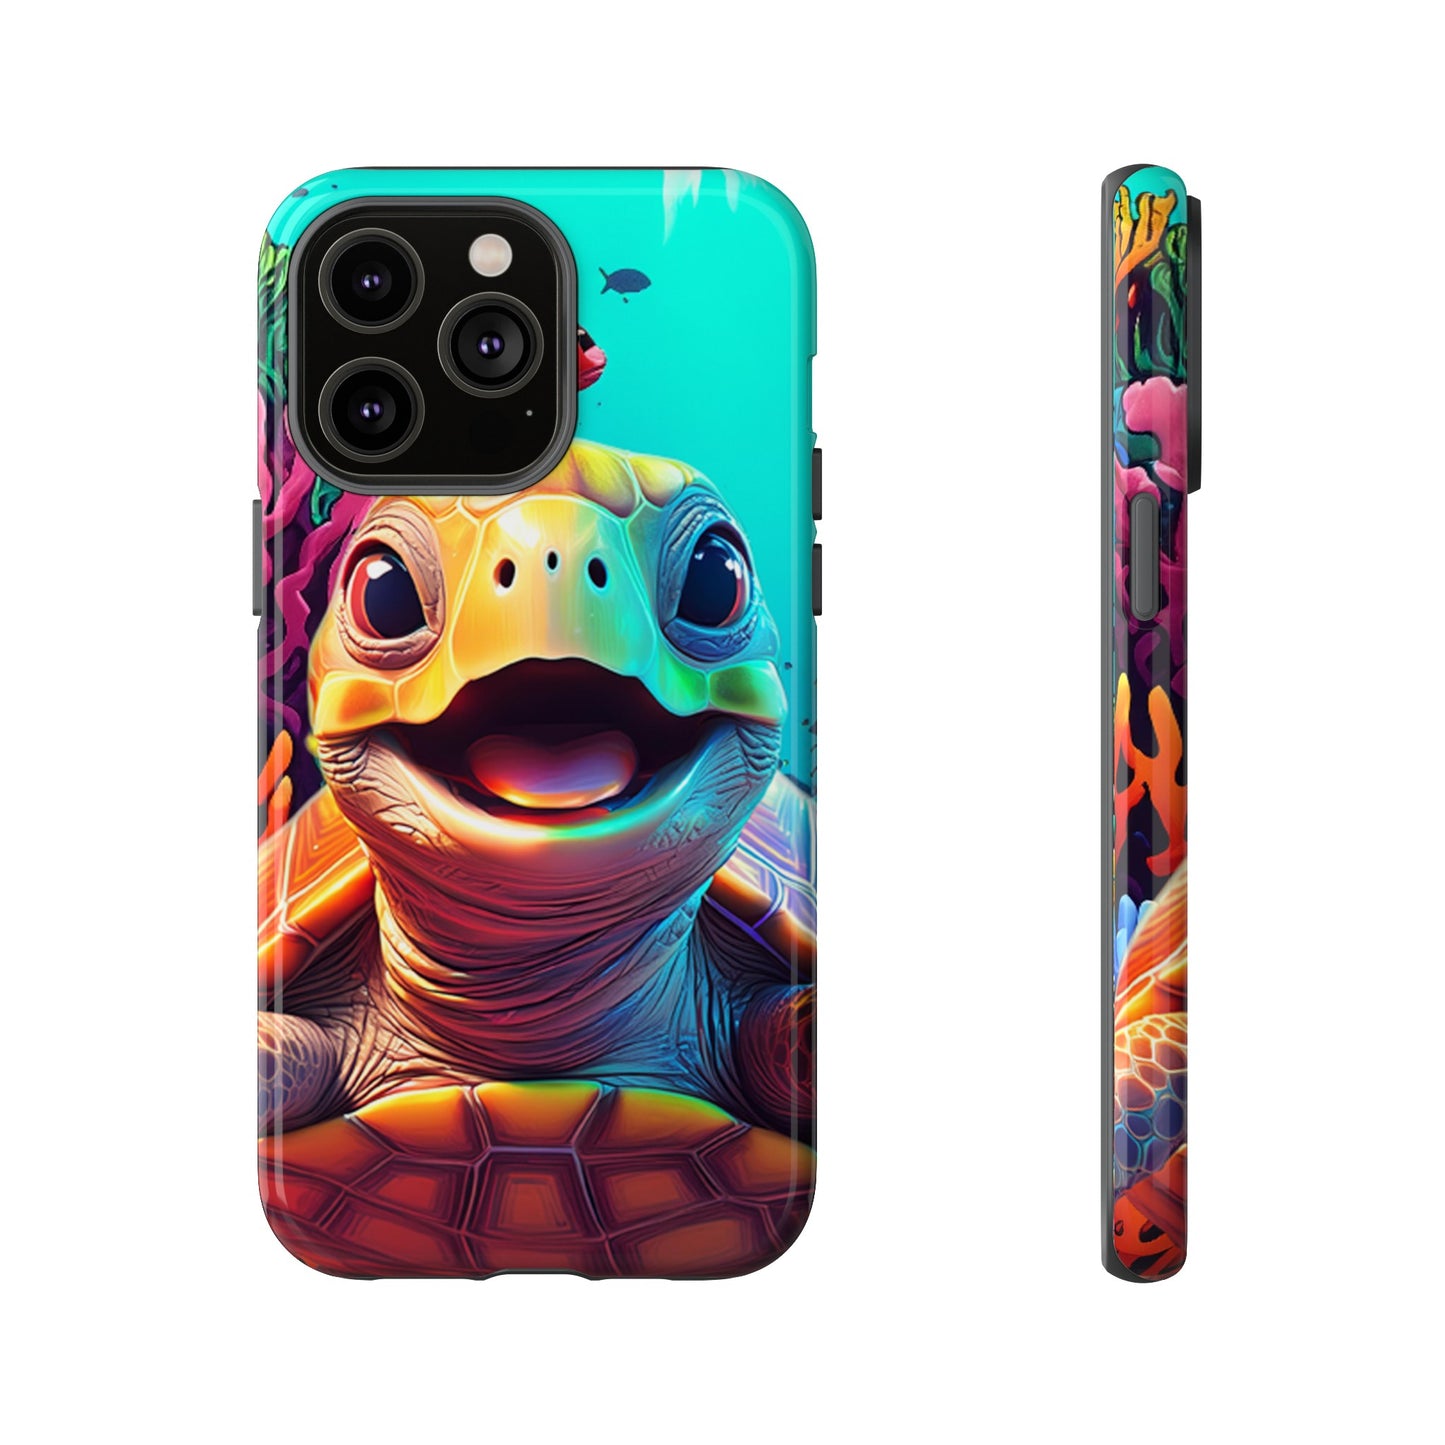 Cheerful Turtle Phone Case for Iphone